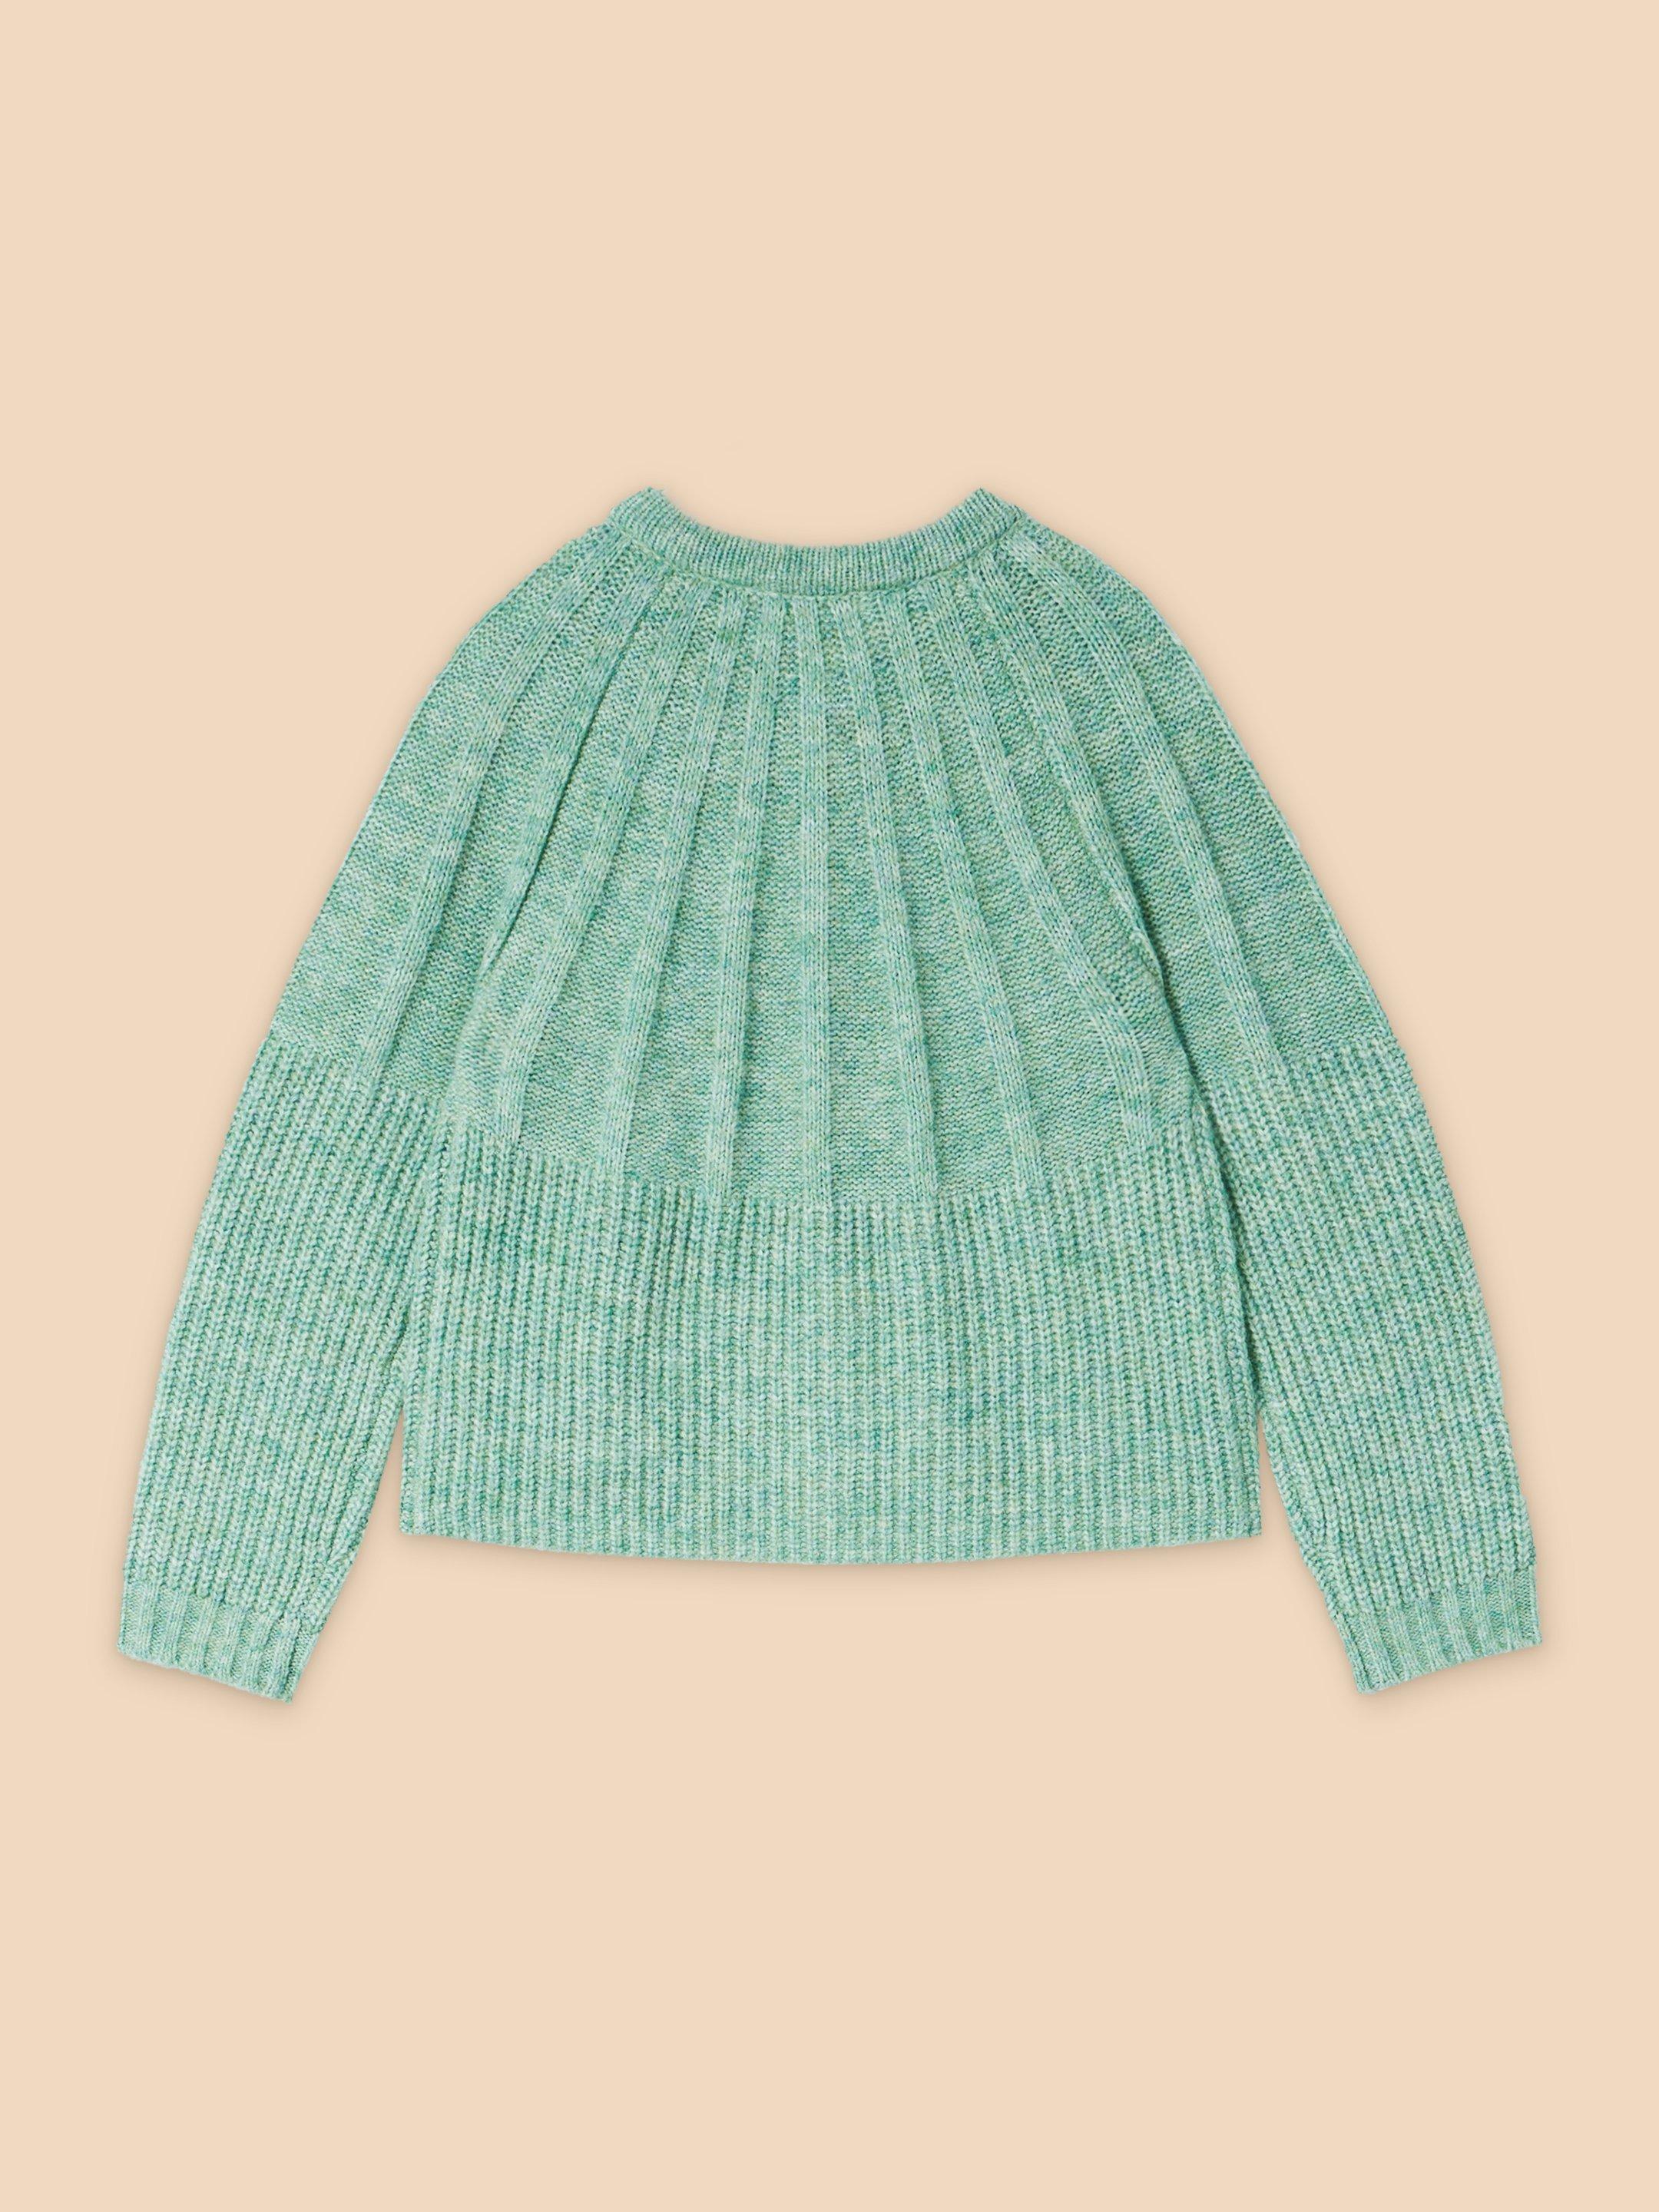 CLOVER CARDIGAN in MID GREEN - FLAT BACK